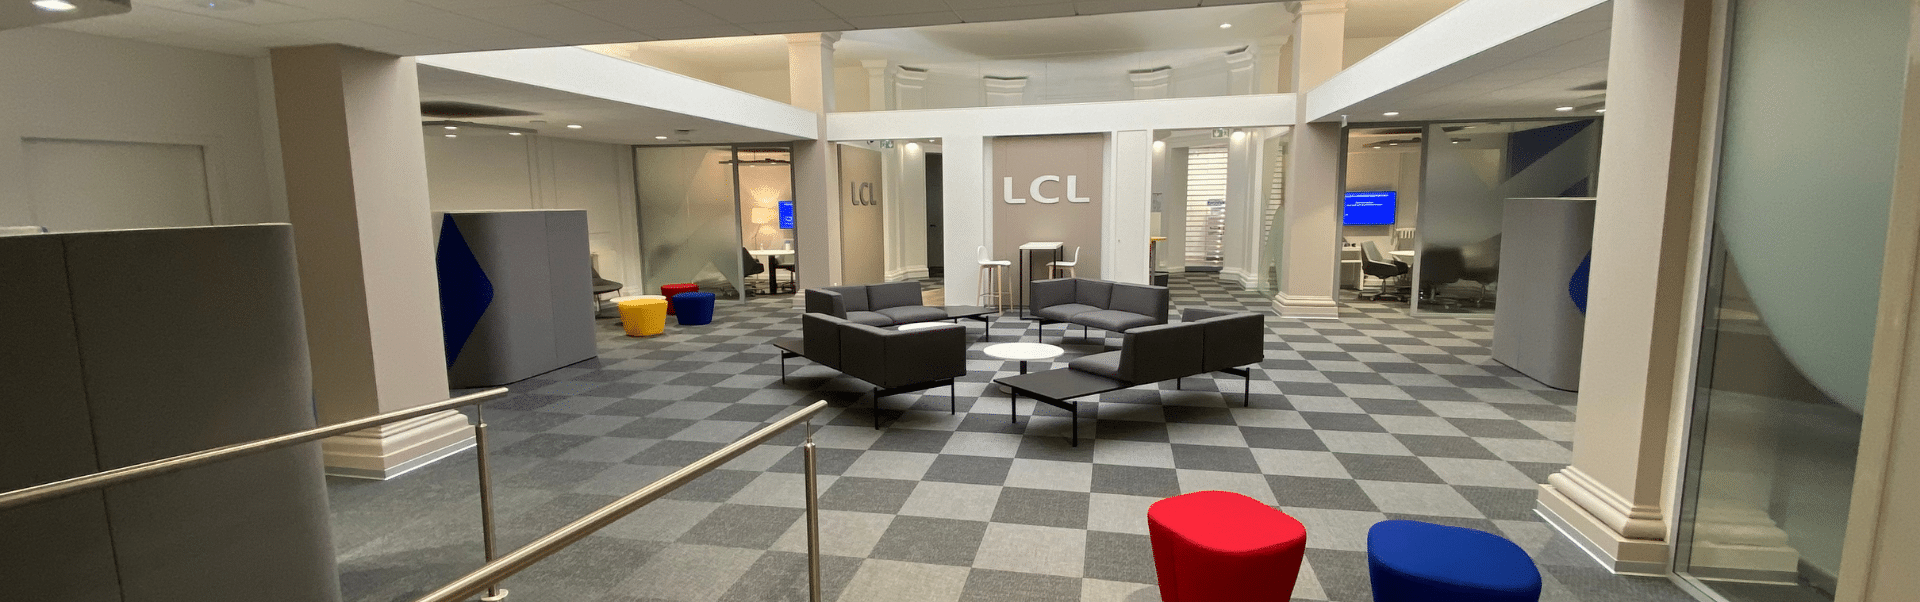 LCL agence